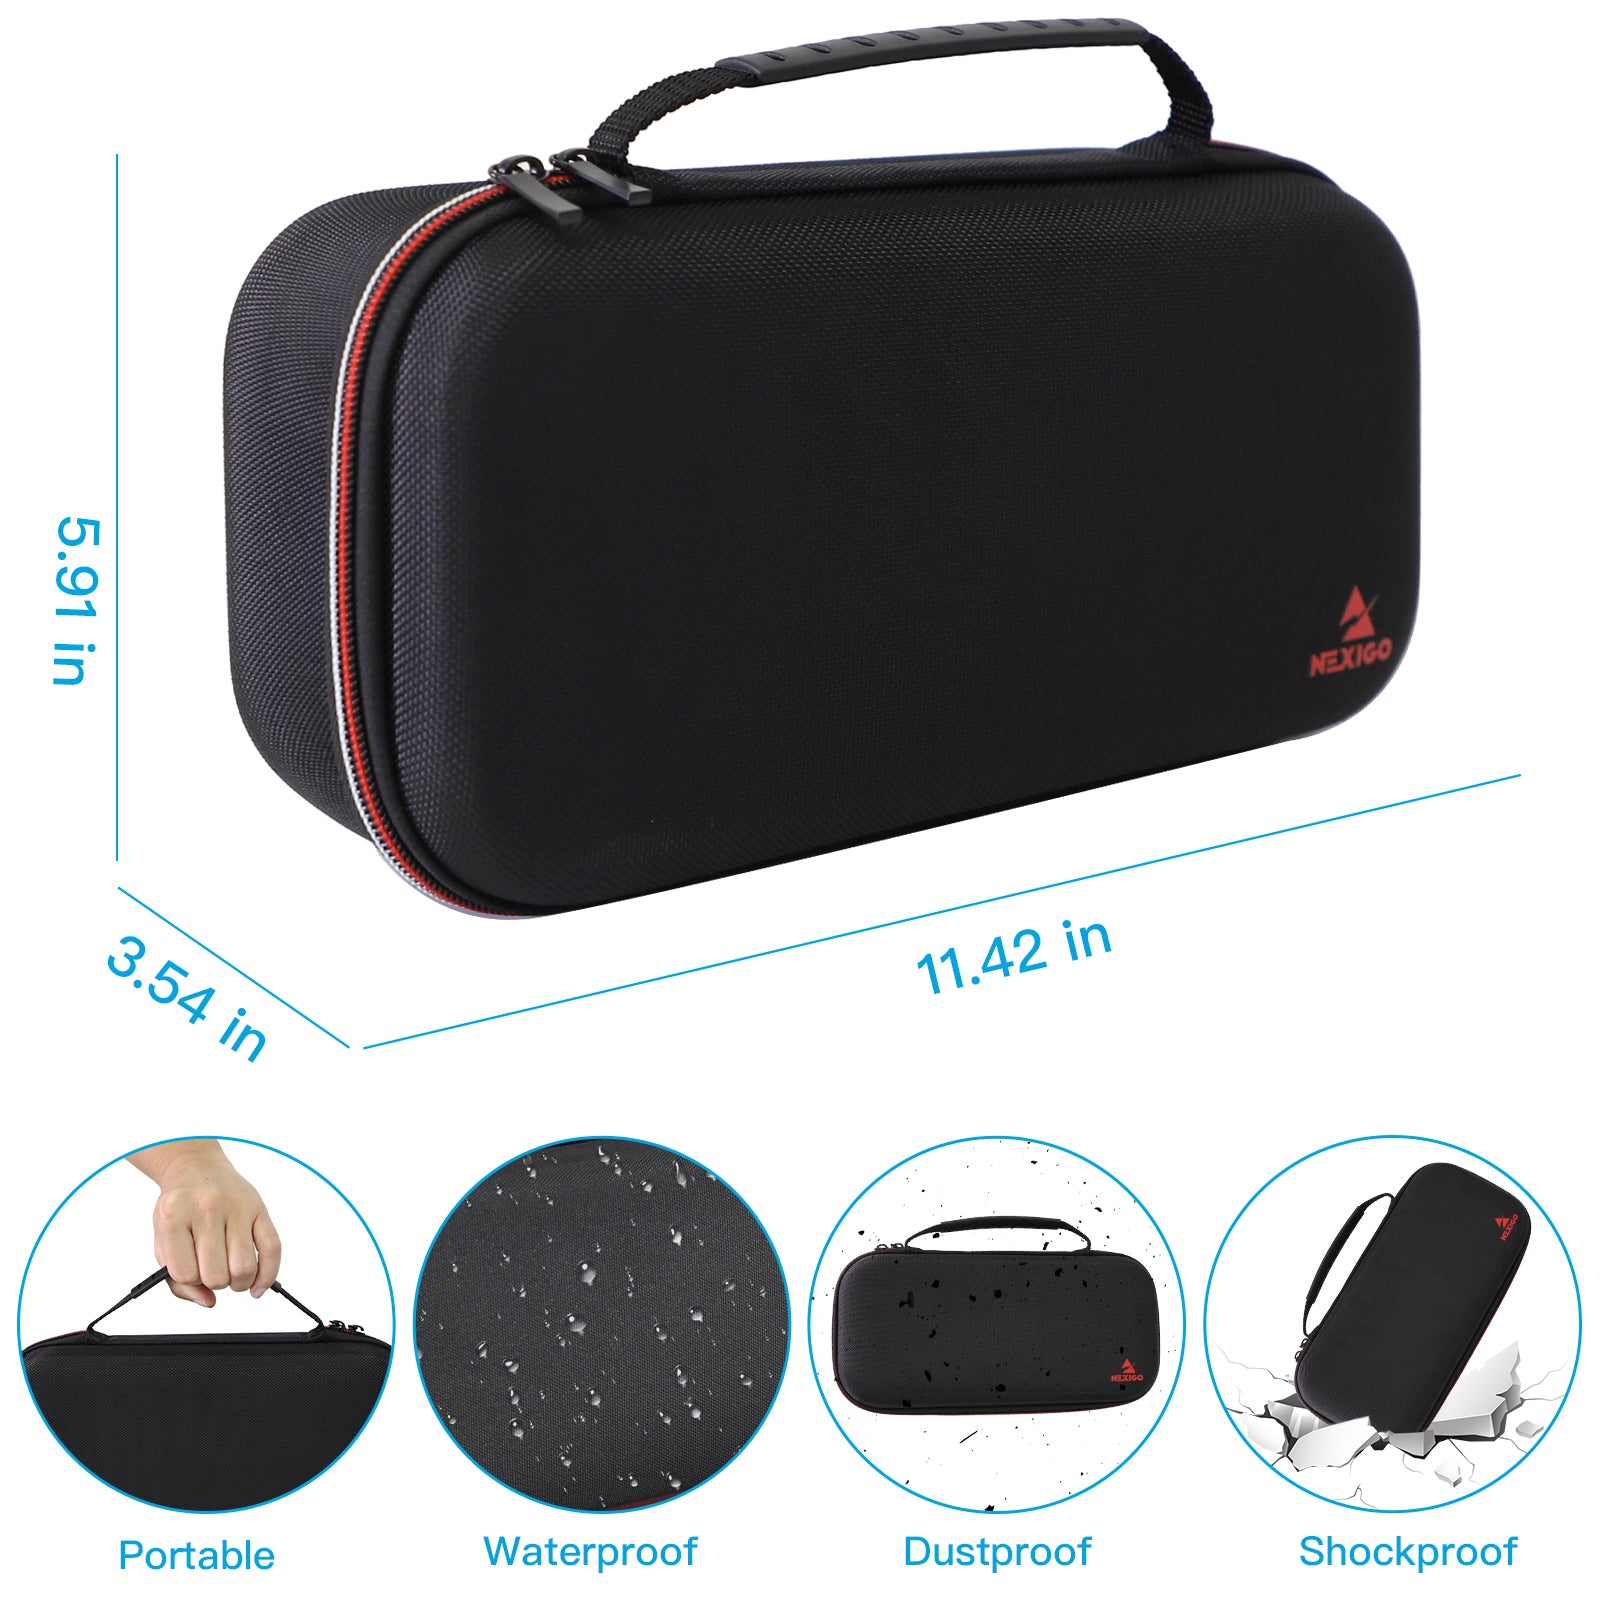 The carry case measures 11.42 x 5.91 x 3.54 inches (L x W x H).